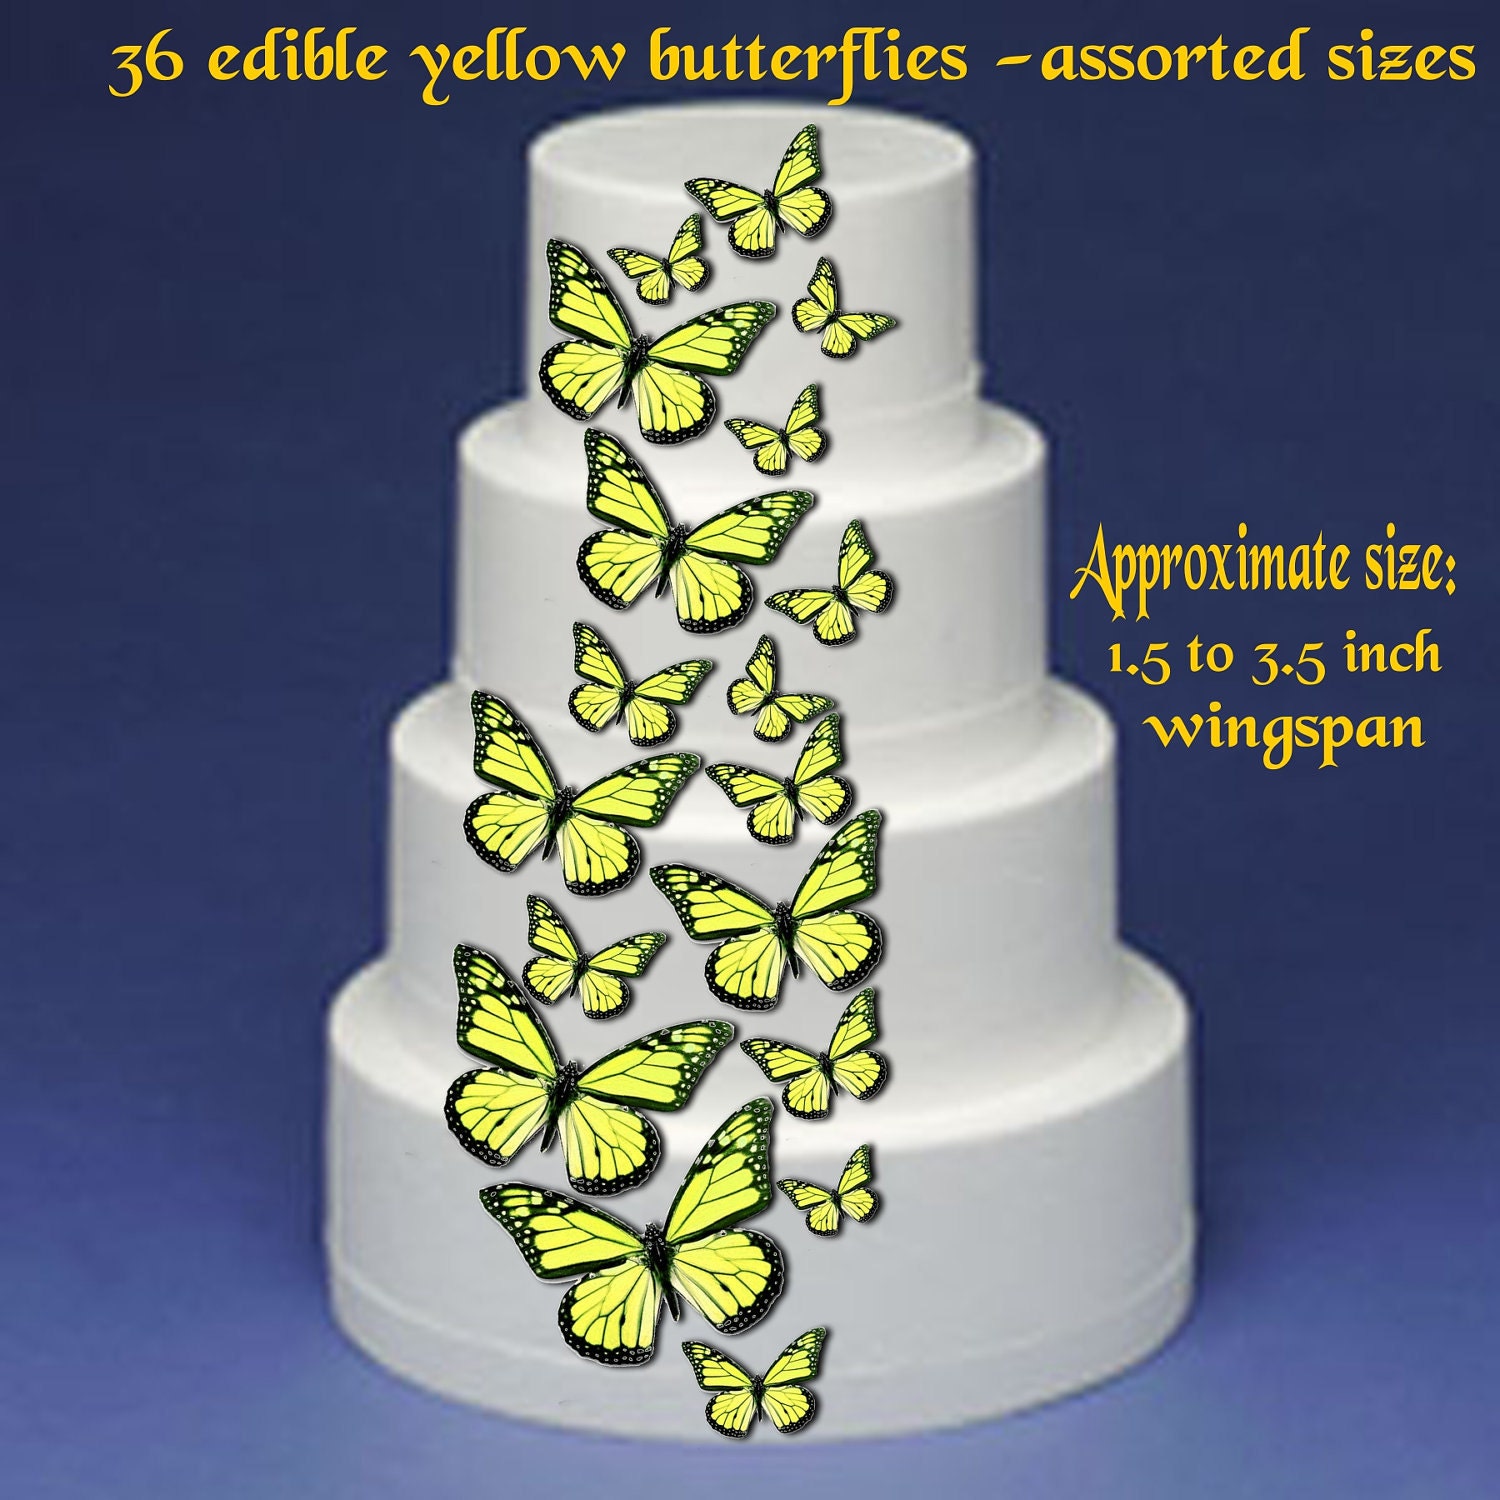 How To Make Butterflies Out Of Wafer Paper